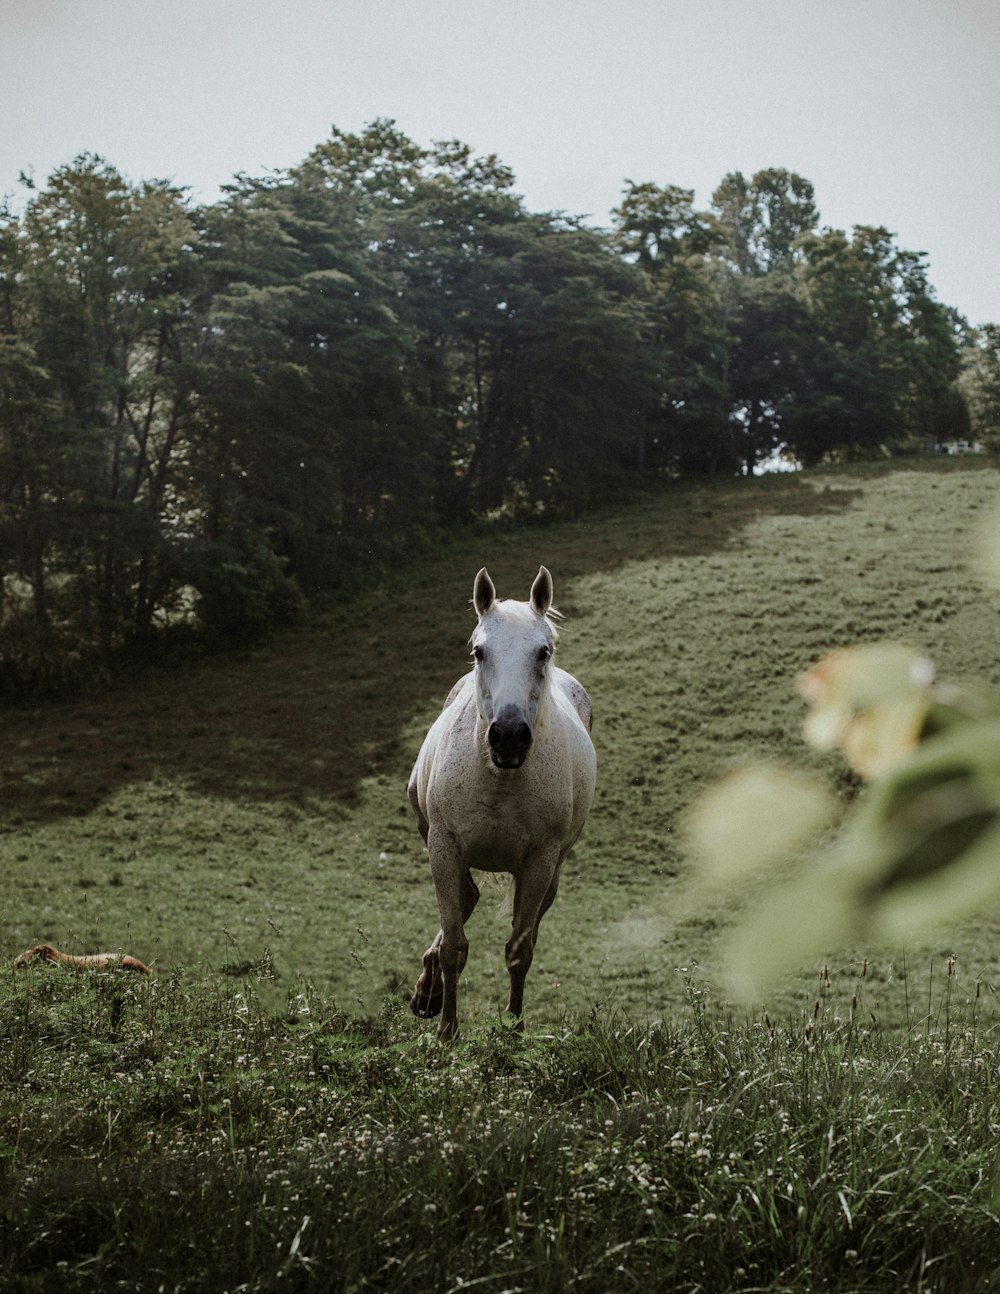 a white horse running in a grassy field